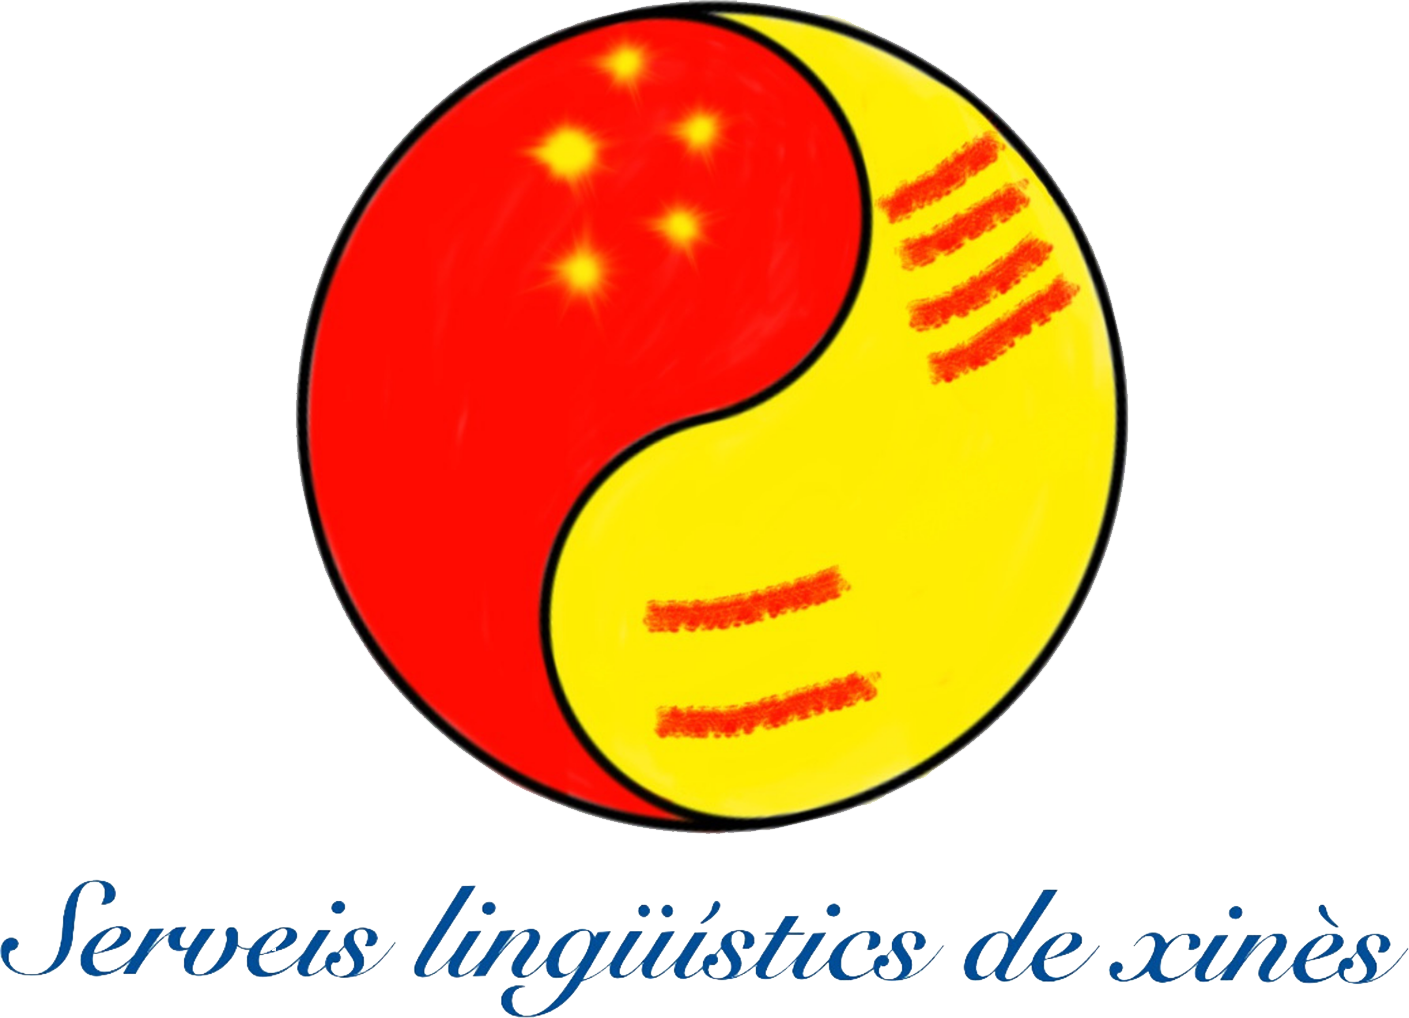 Chinese language services and business consultancy